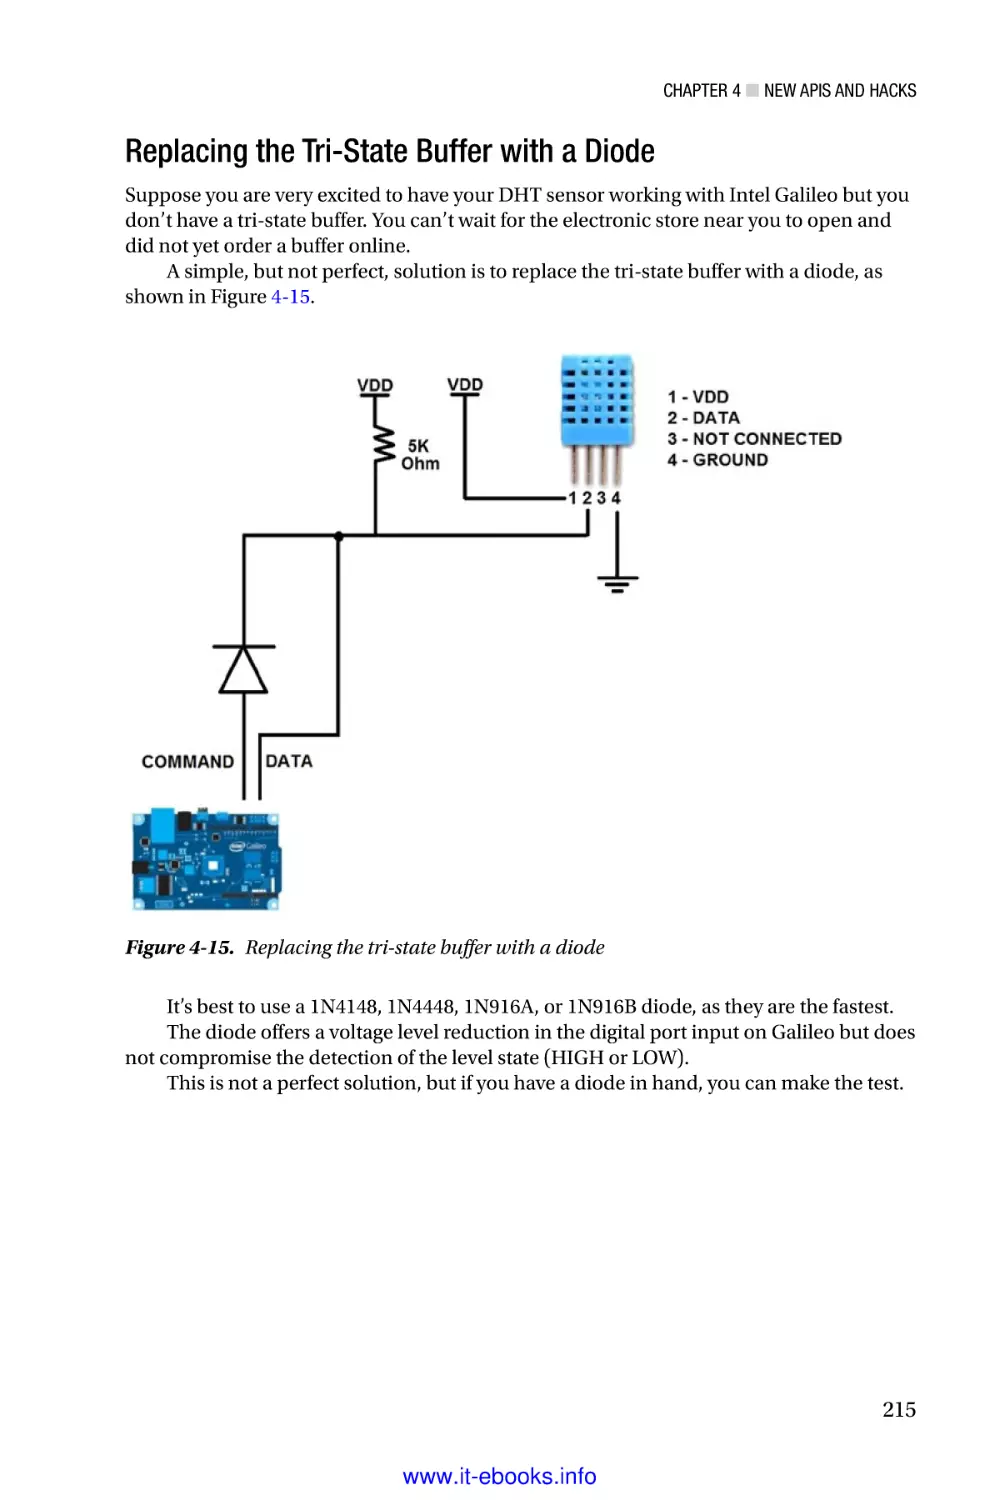 Replacing the Tri-State Buffer with a Diode